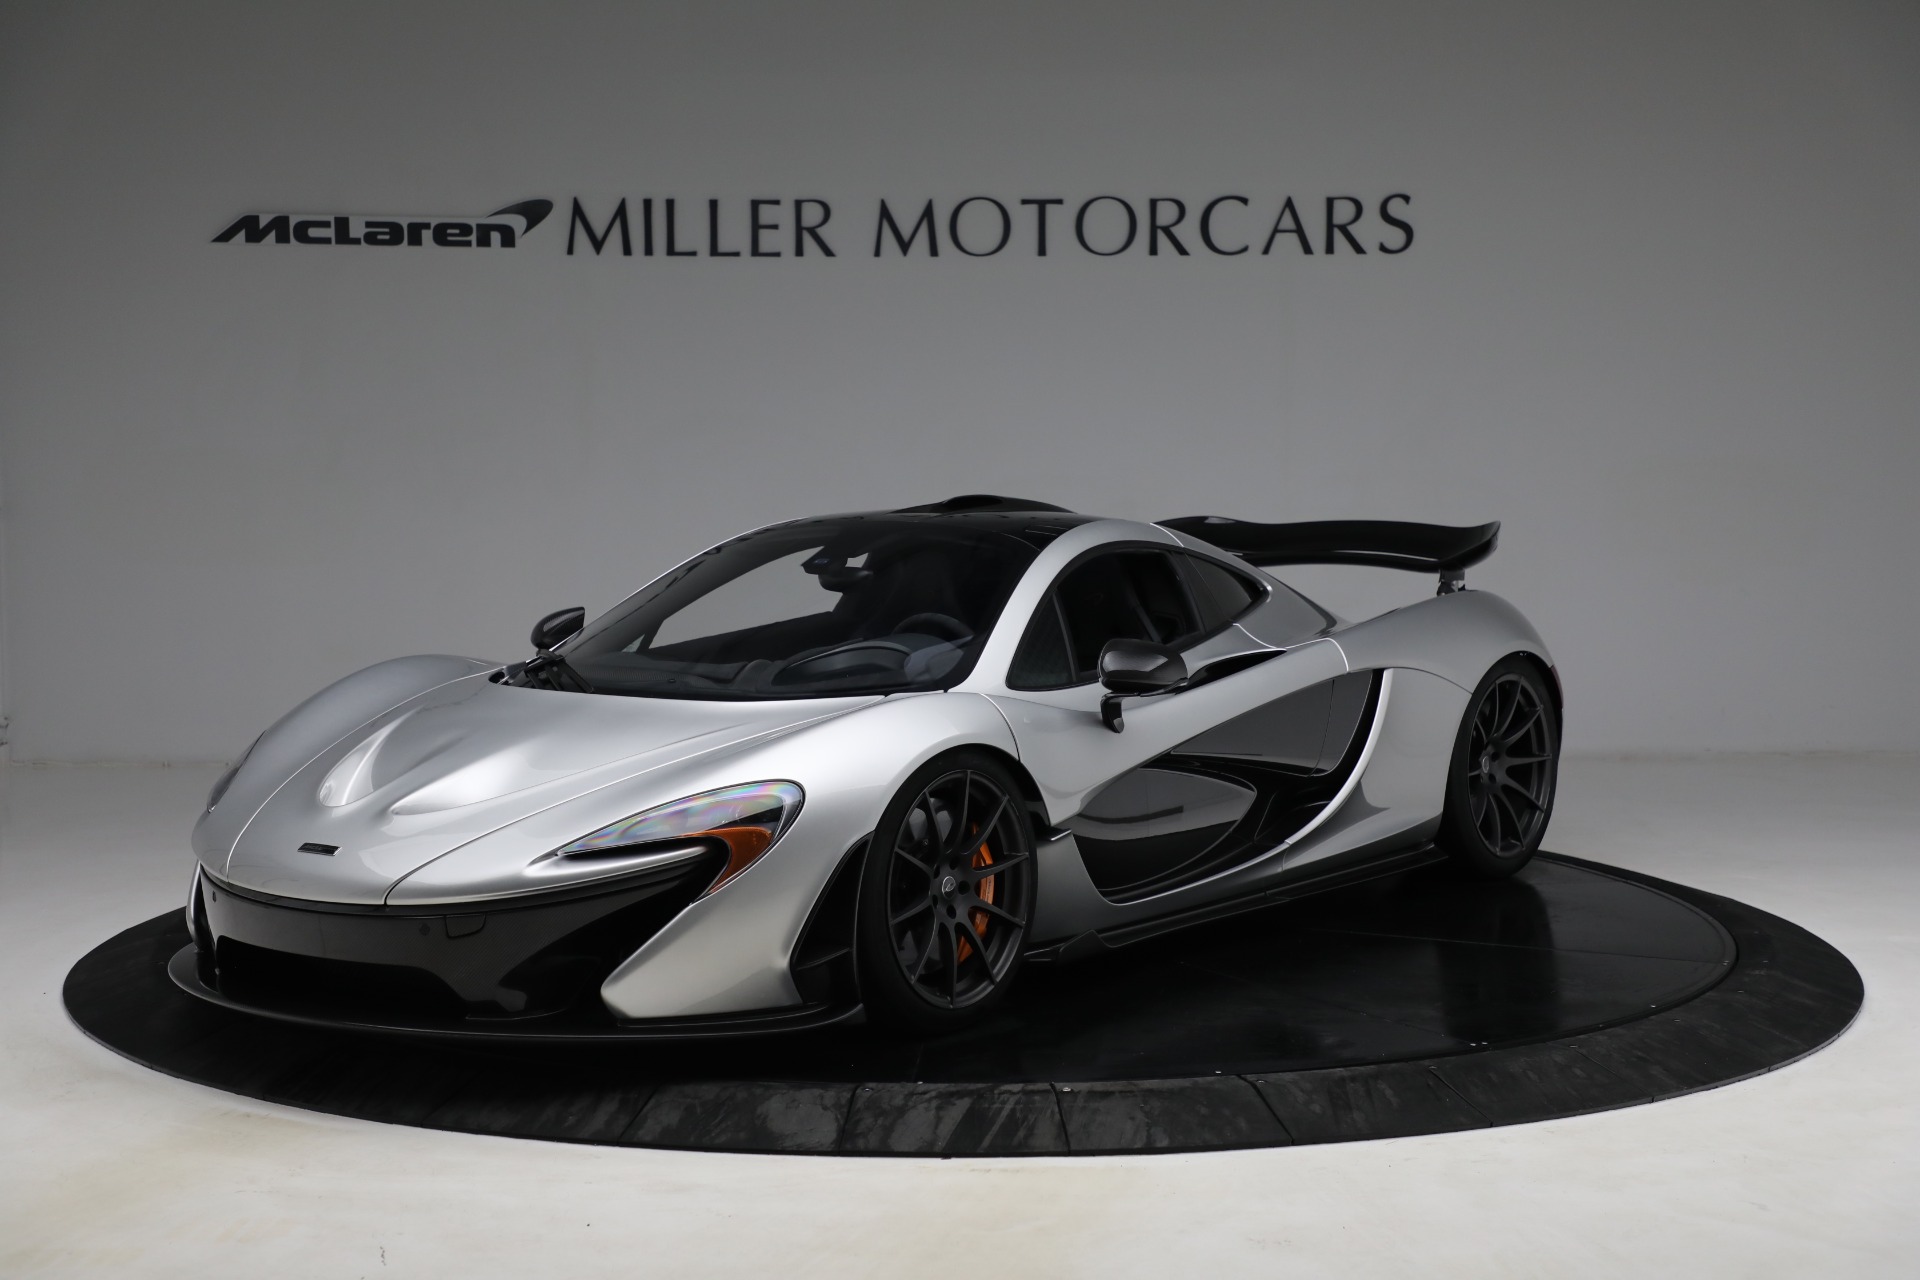 Used 2015 McLaren P1 for sale $1,825,000 at Aston Martin of Greenwich in Greenwich CT 06830 1